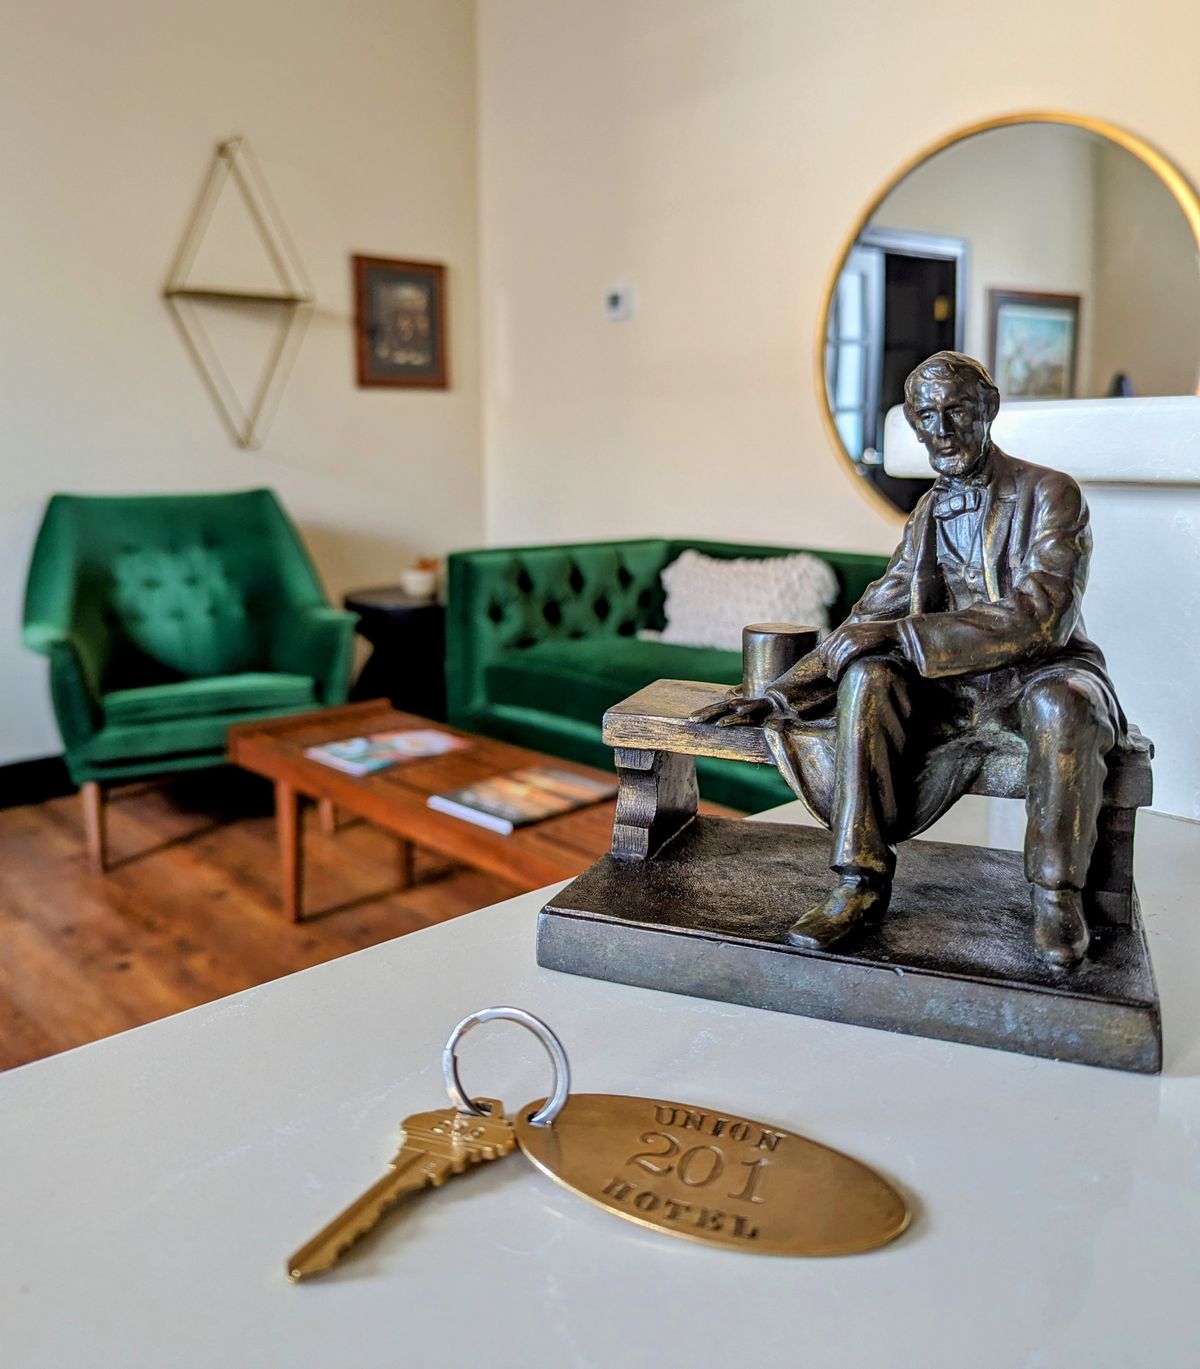 a closer look inside a room at the Union Hotel. A small bronze statue of Abe Lincoln is the focal point, with a room key labeled "Union 201 Hotel" in the foreground. Green velvet armchairs and a small wooden table can be seen in the background, giving the space an elegant, classic feel.